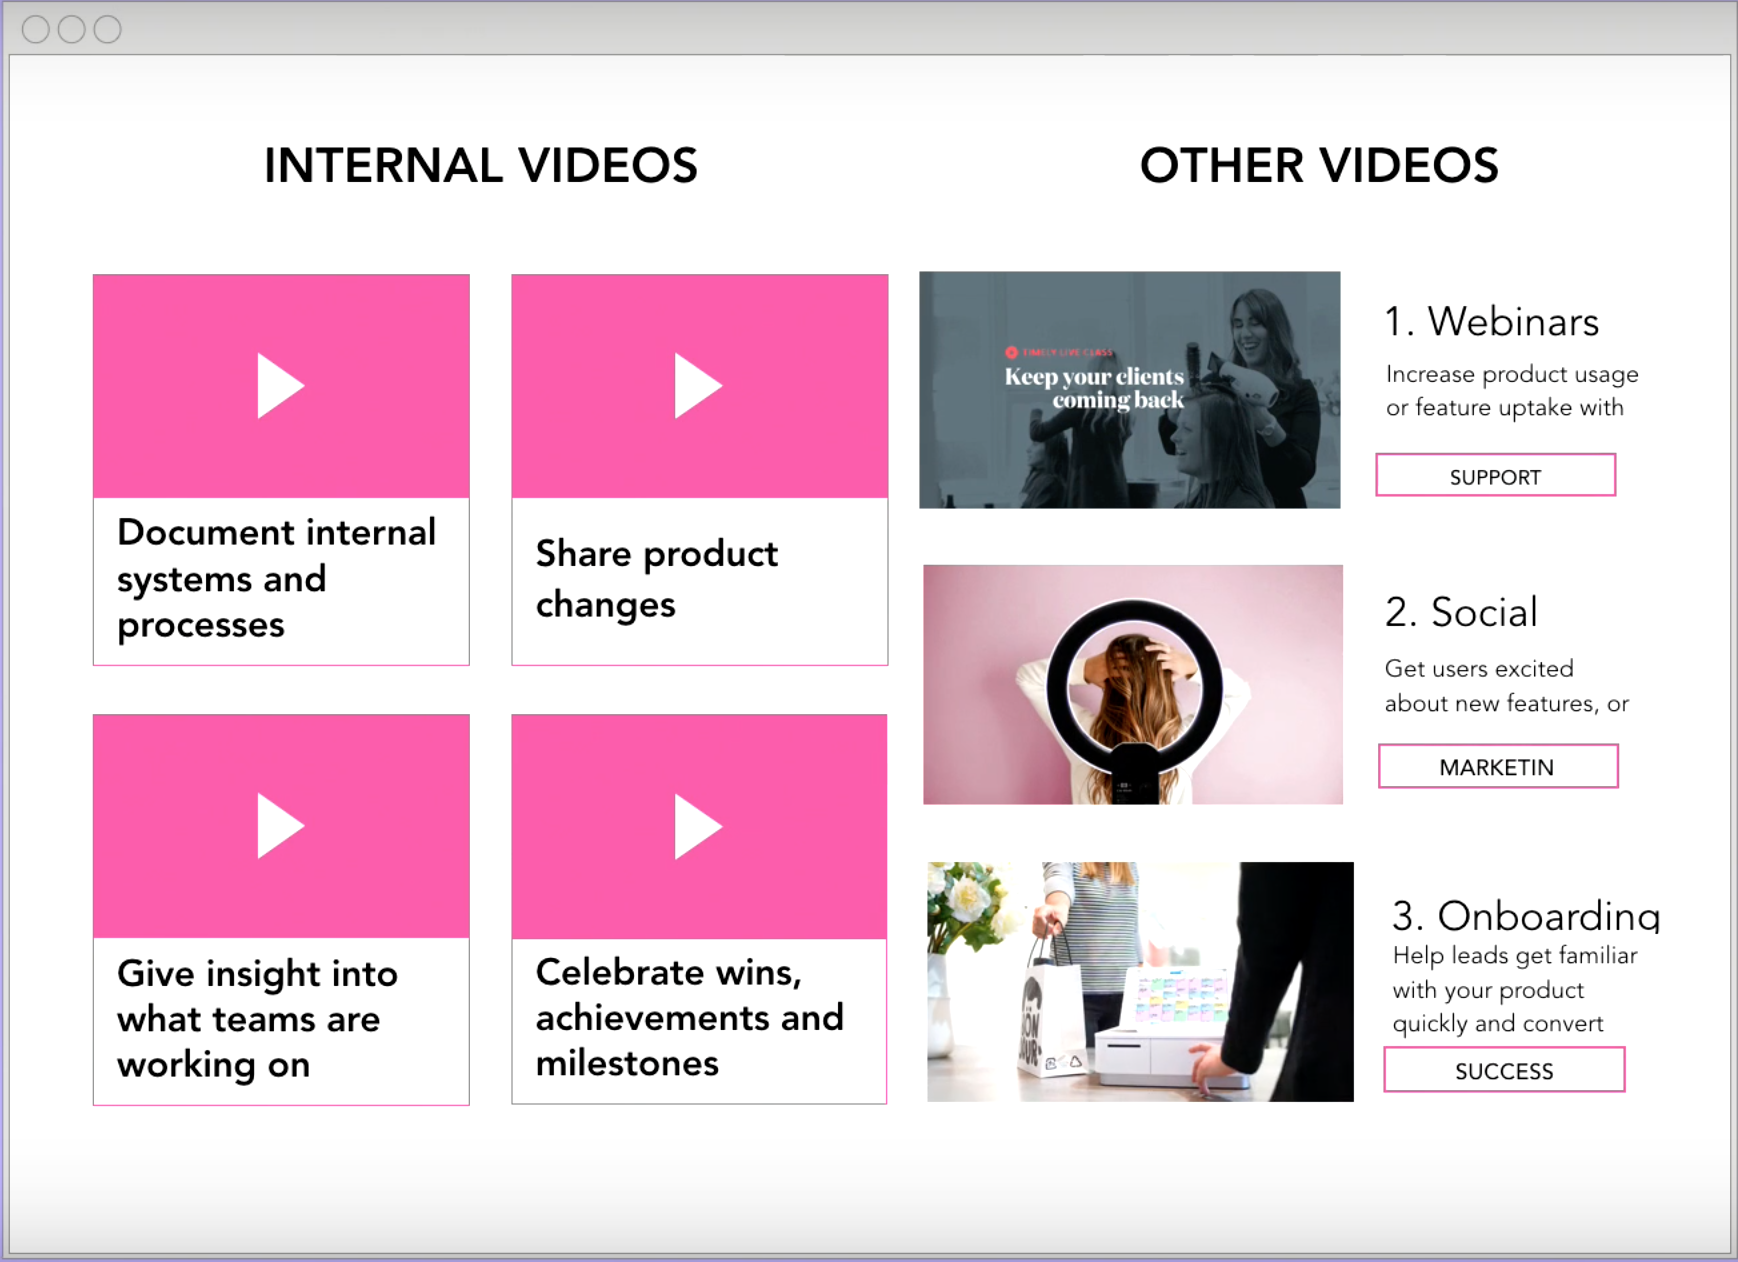 Uses for internal video documentation and other types of videos